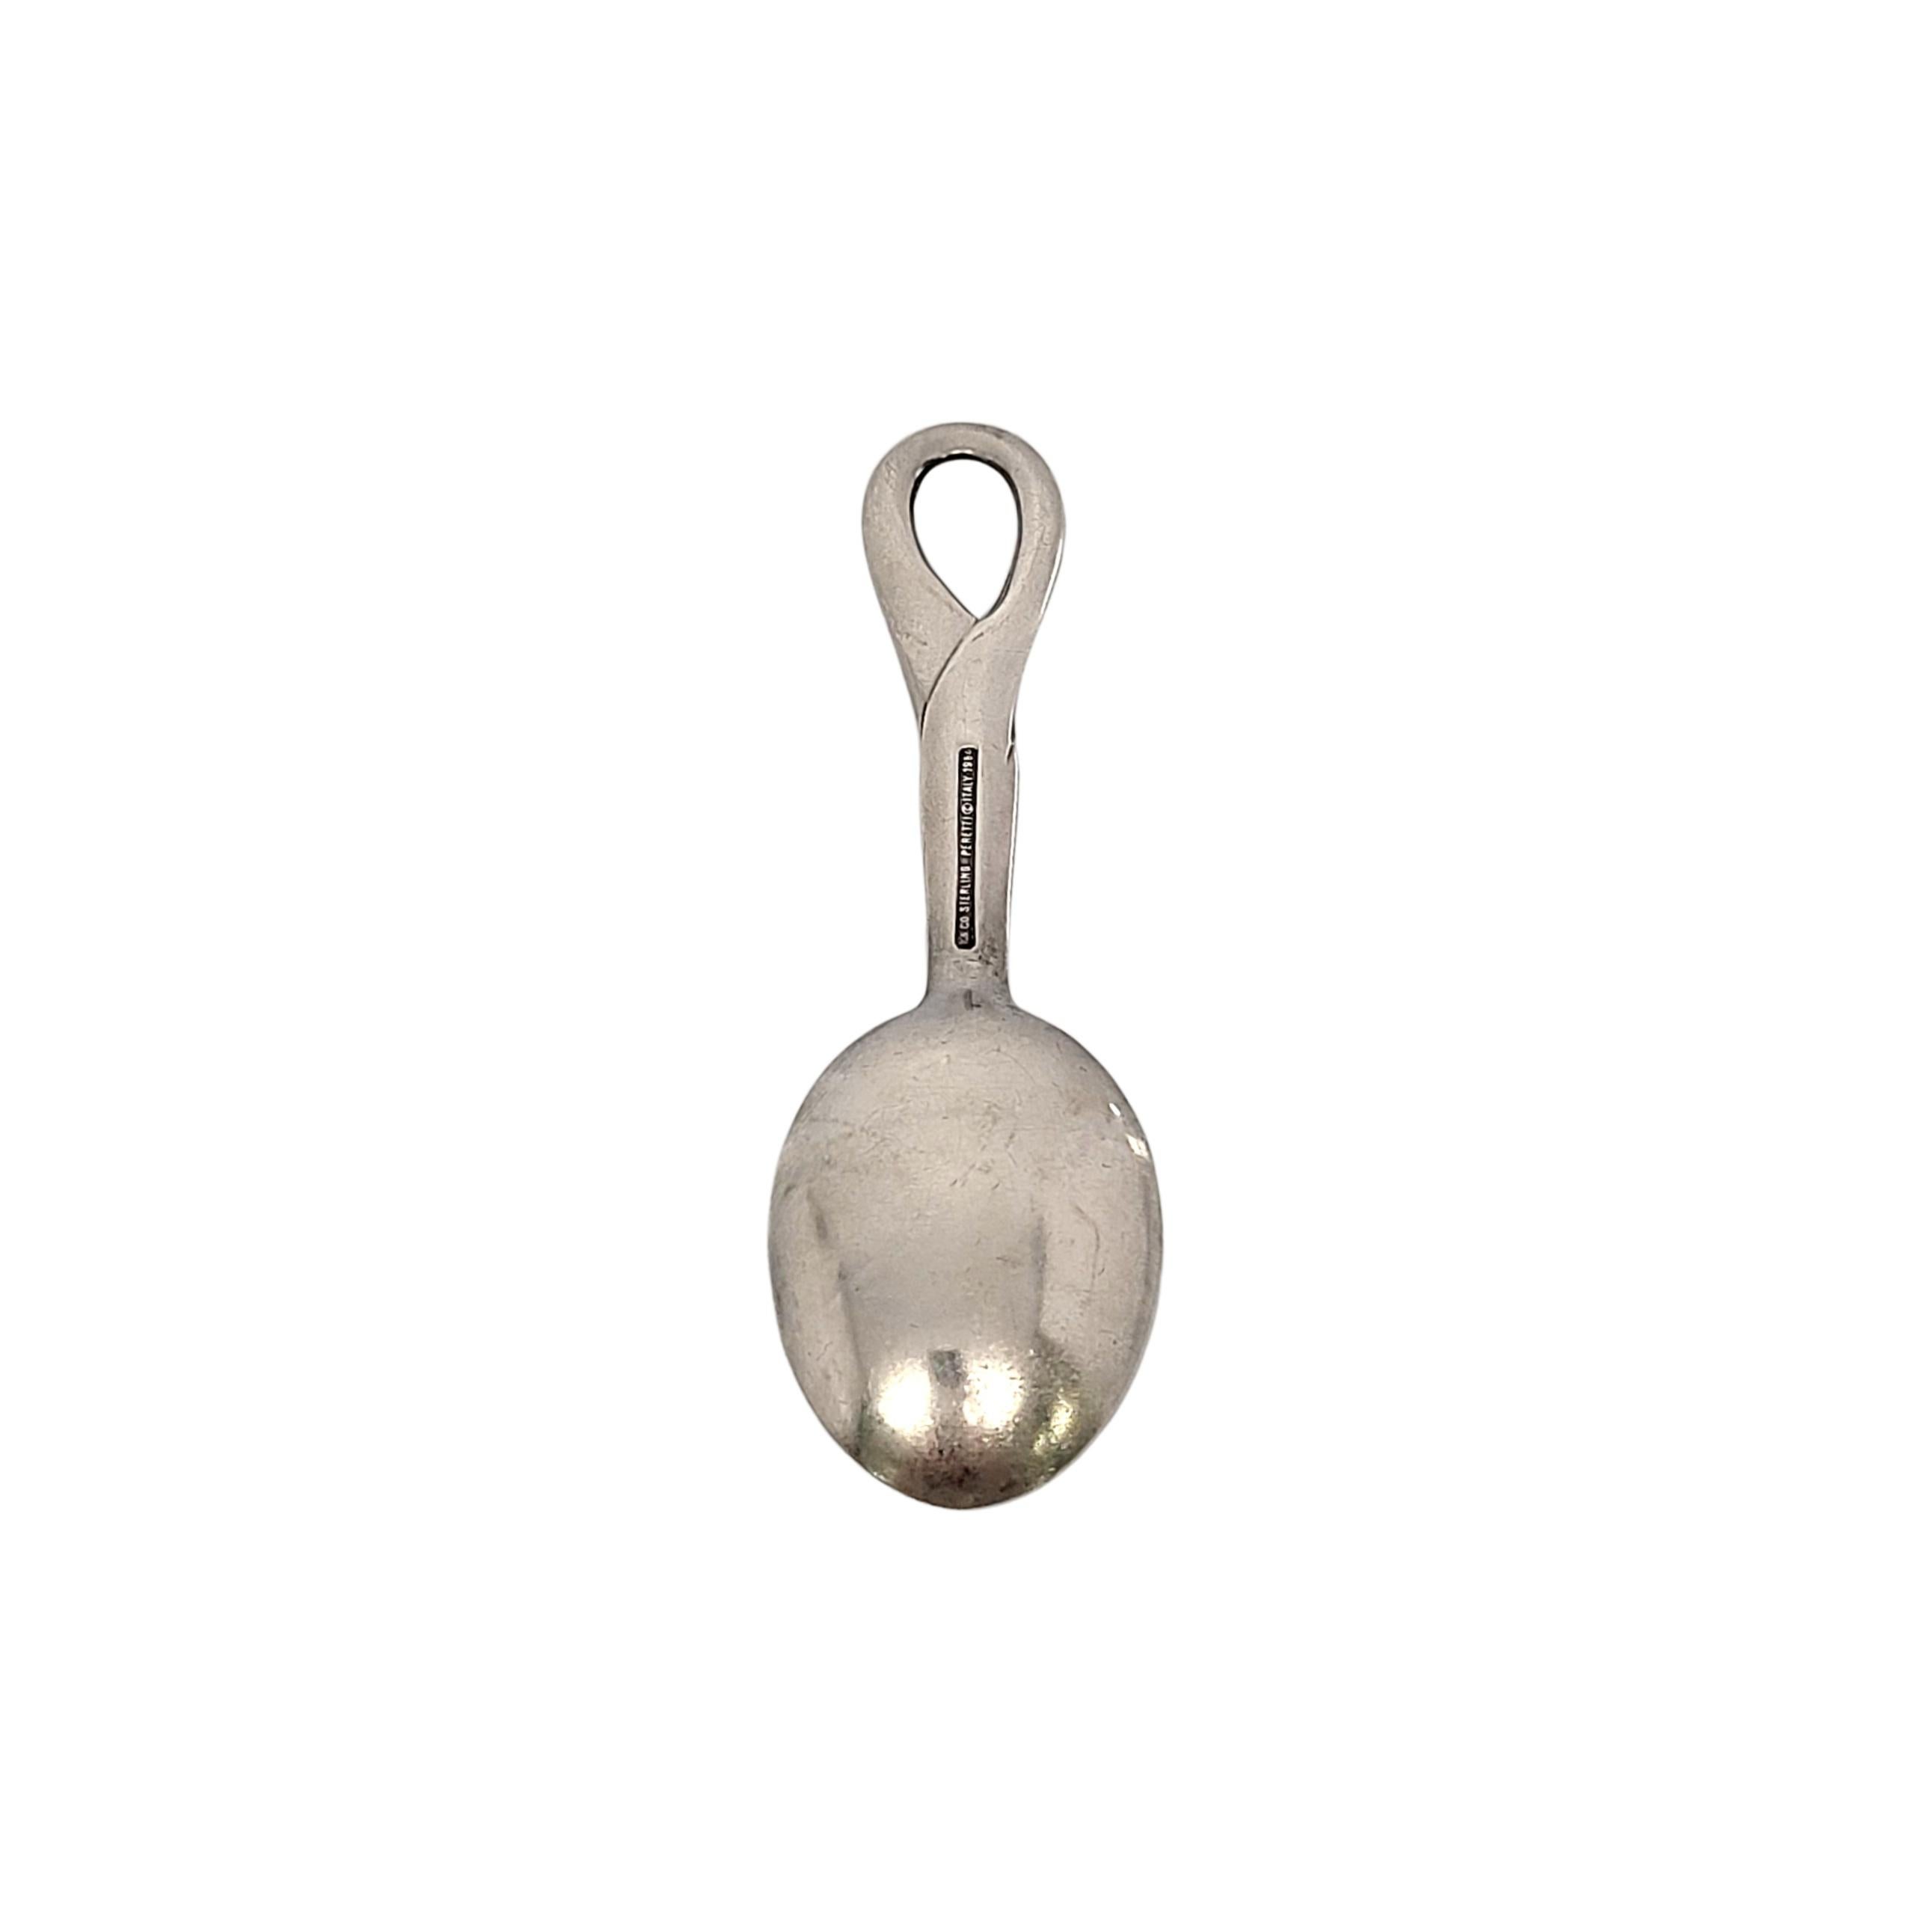 Tiffany & Co sterling silver child/baby feeding spoon in the Padova pattern by Elsa Peretti.

No monogram

Padova is a simple and classic design featuring a loop at the top of the handle, named for the Italian city in which it was created in. Does